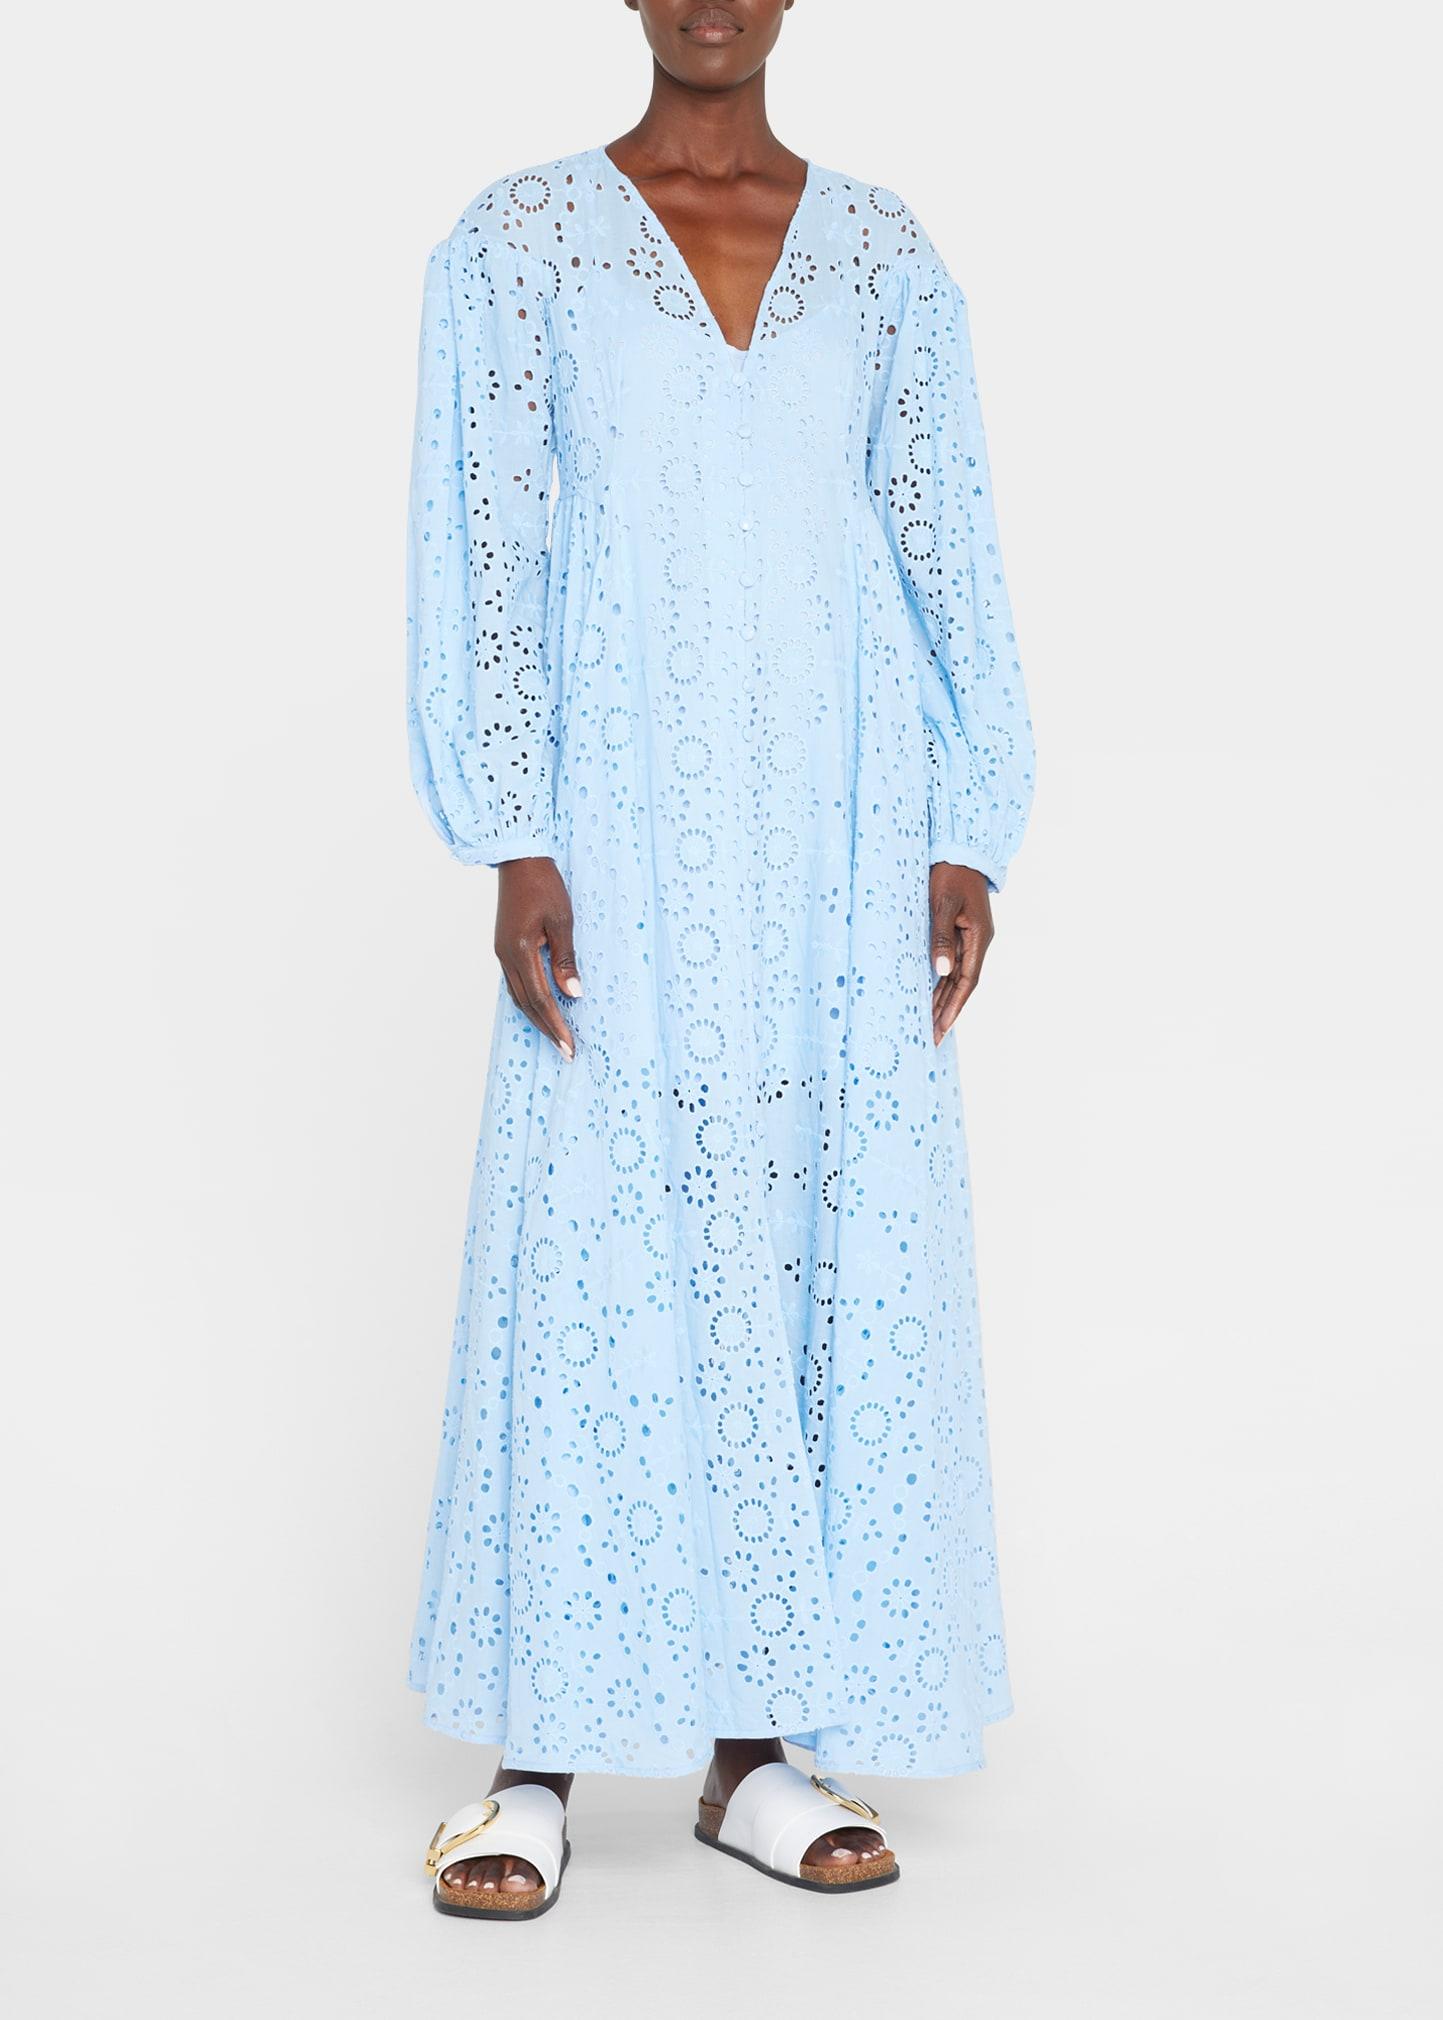 Evi Grintela Hattie Broderie Anglaise Button-down Dress in Blue | Lyst